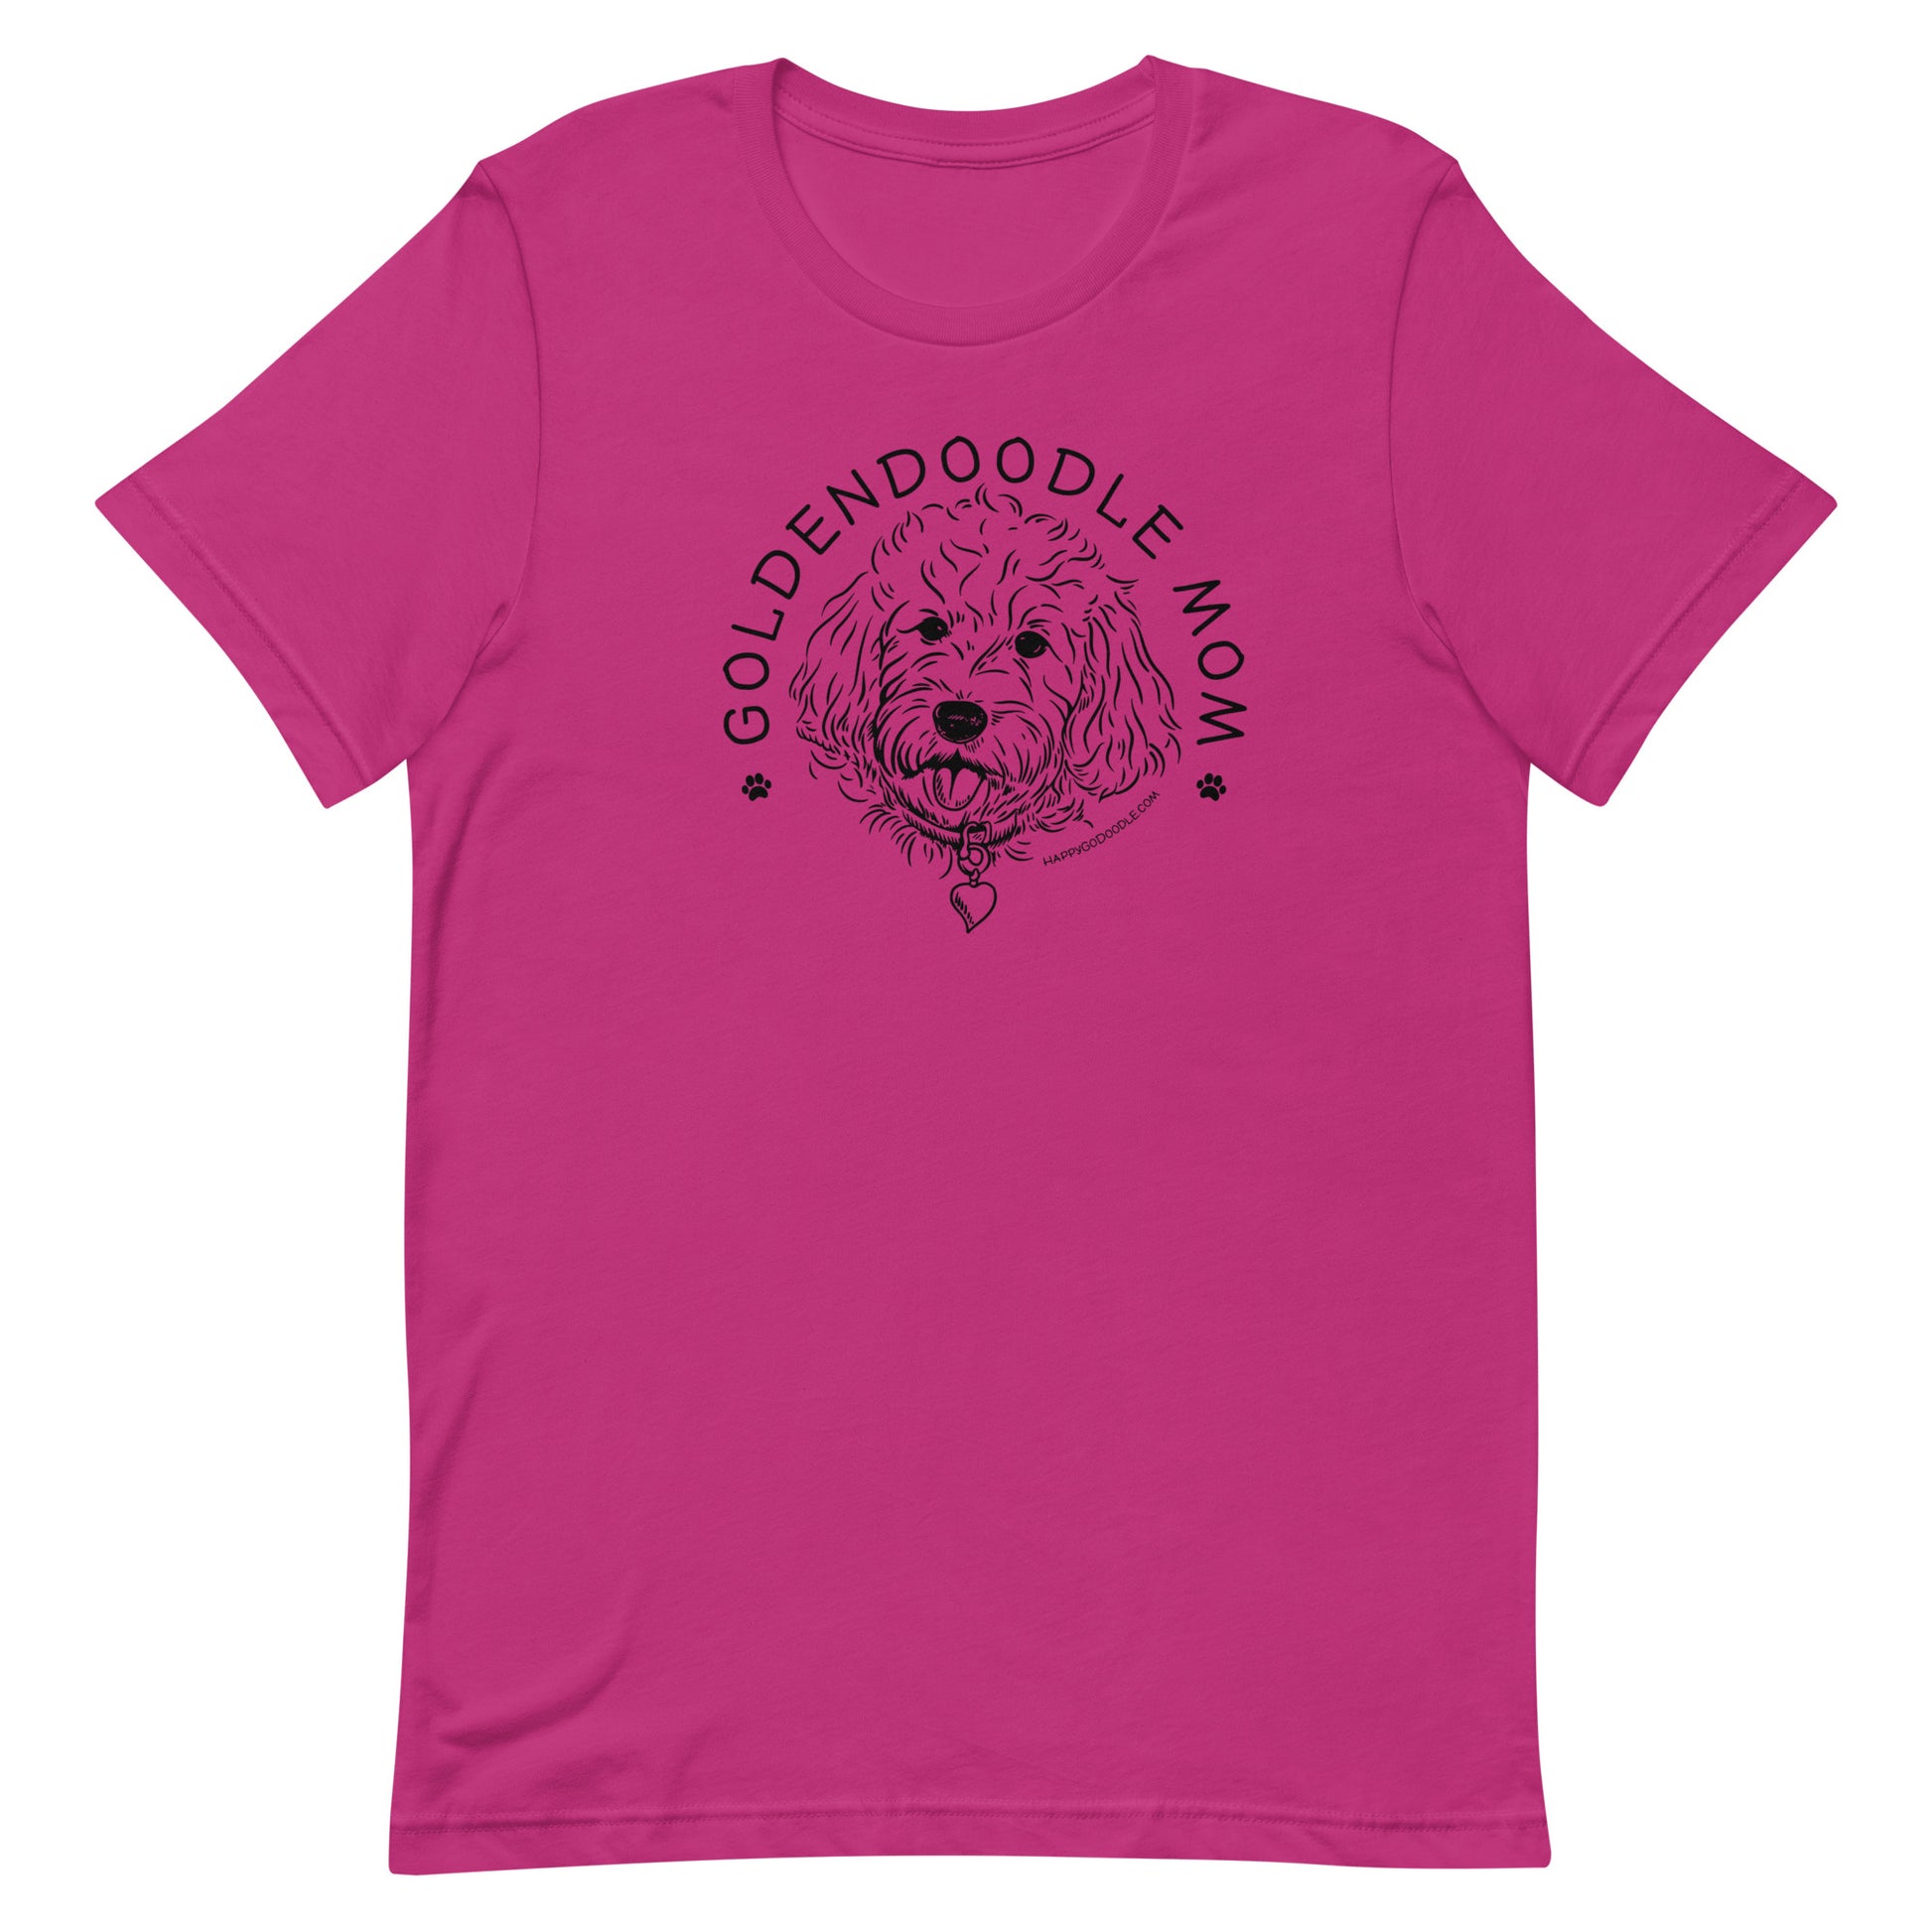 Goldendoodle Mom t-shirt with Goldendoodle face and words "Goldendoodle Mom" in berry color